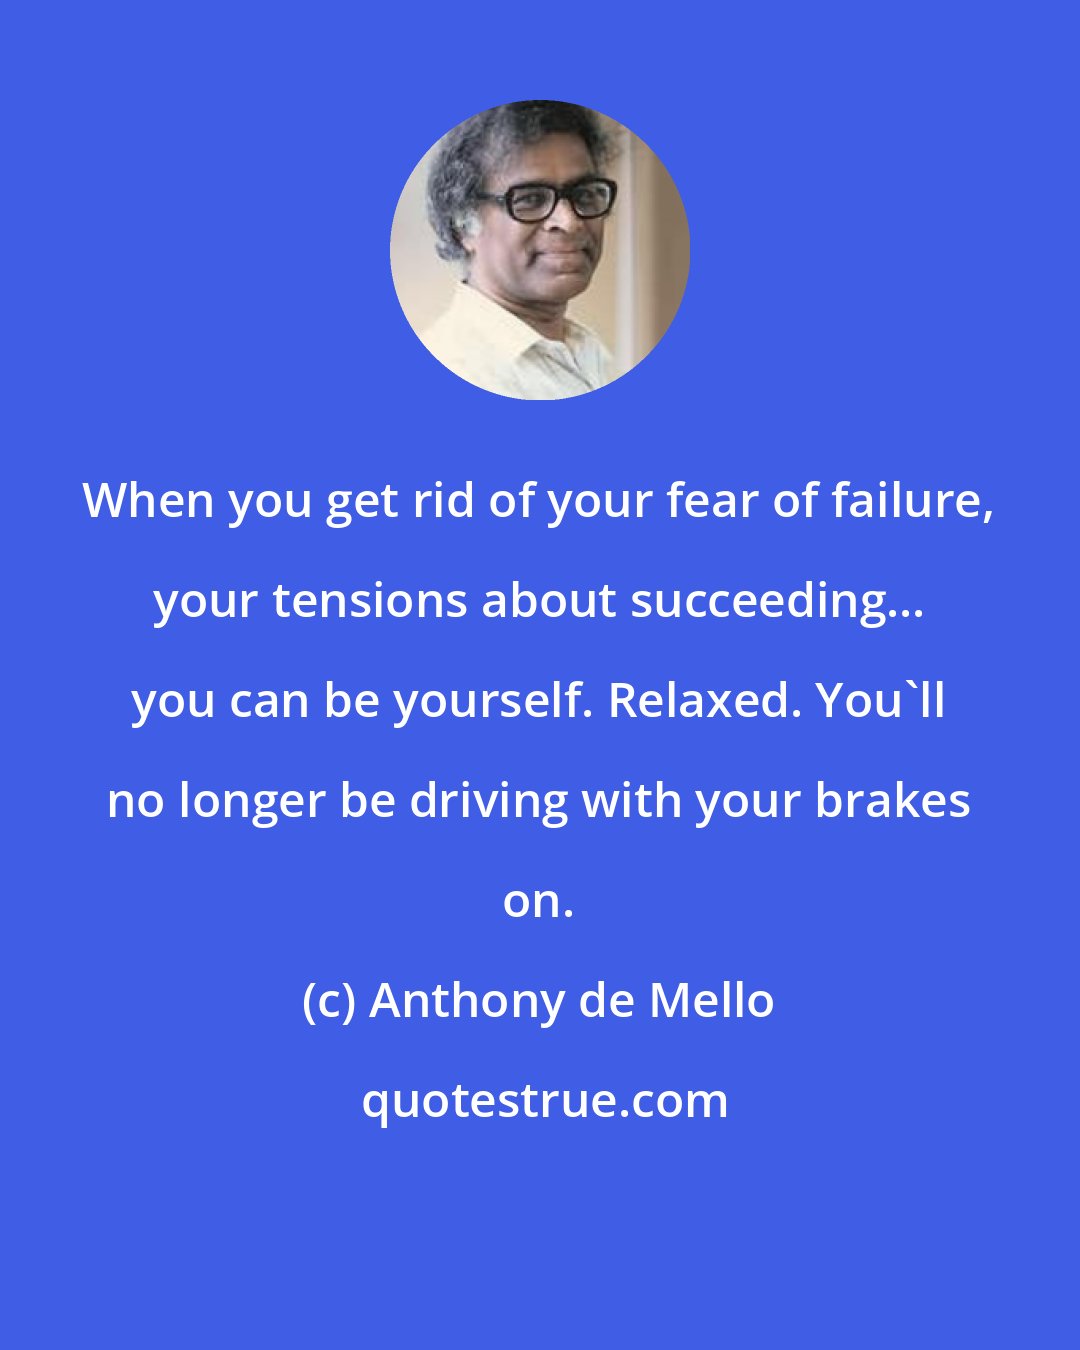 Anthony de Mello: When you get rid of your fear of failure, your tensions about succeeding... you can be yourself. Relaxed. You'll no longer be driving with your brakes on.